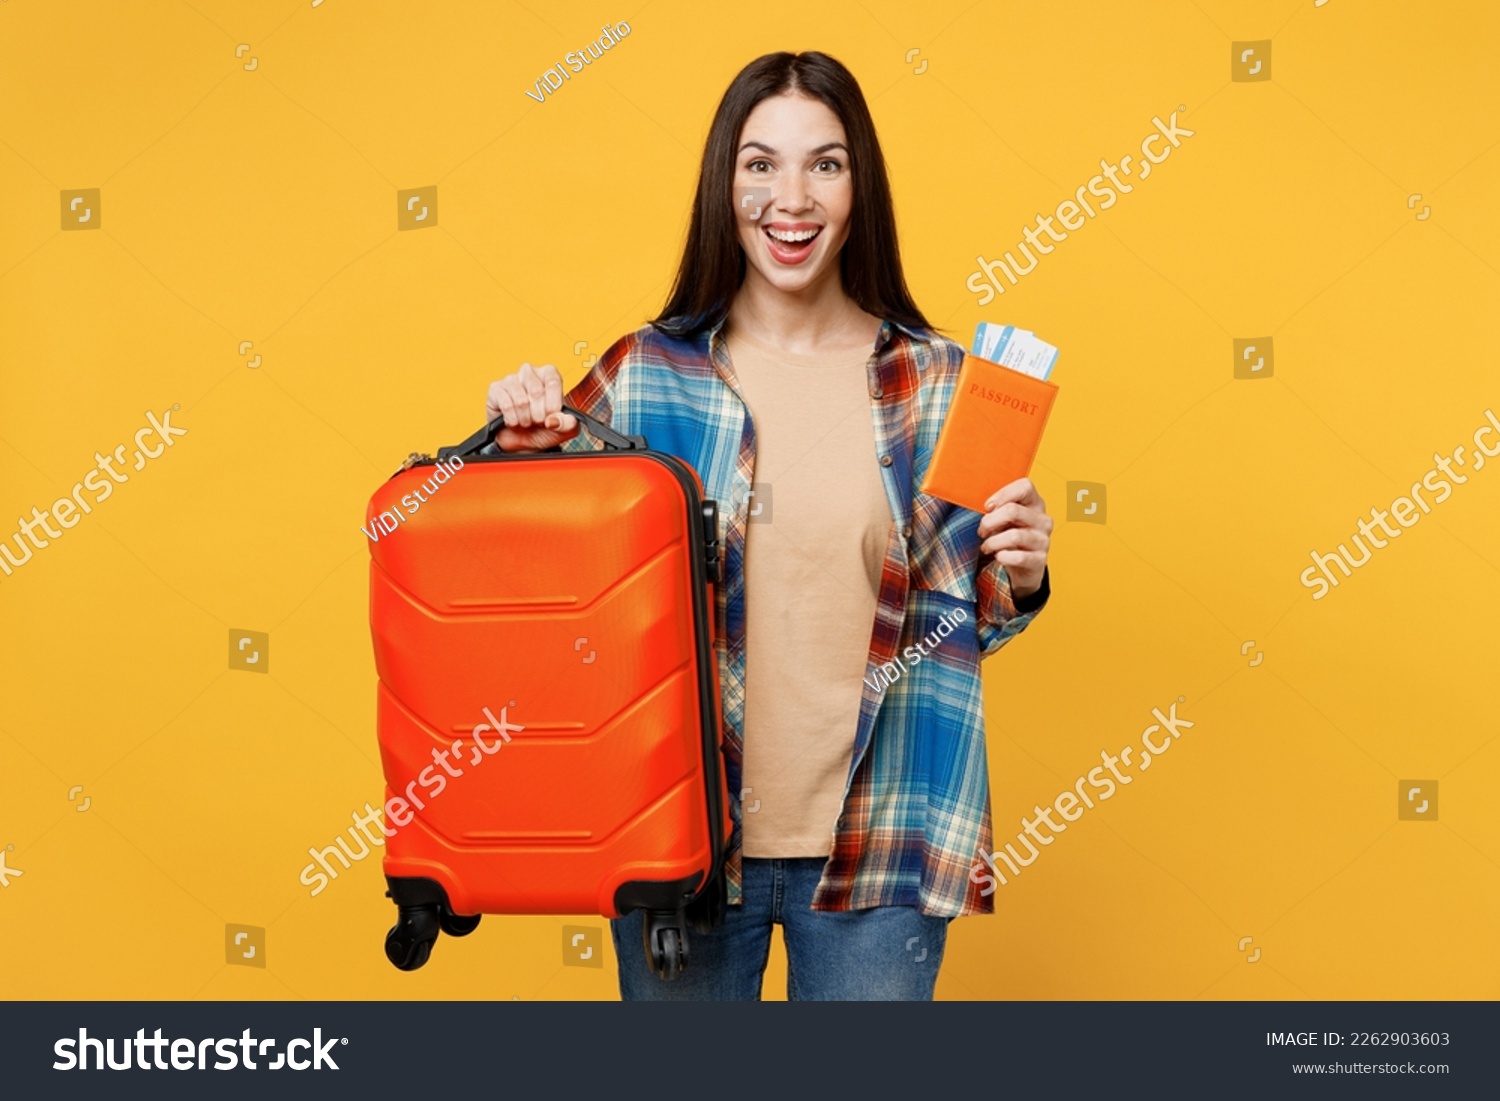 Traveler happy woman wear casual clothes hold valise passport ticket isolated on plain yellow background studio. Tourist travel abroad in free spare time rest getaway. Air flight trip journey concept #2262903603